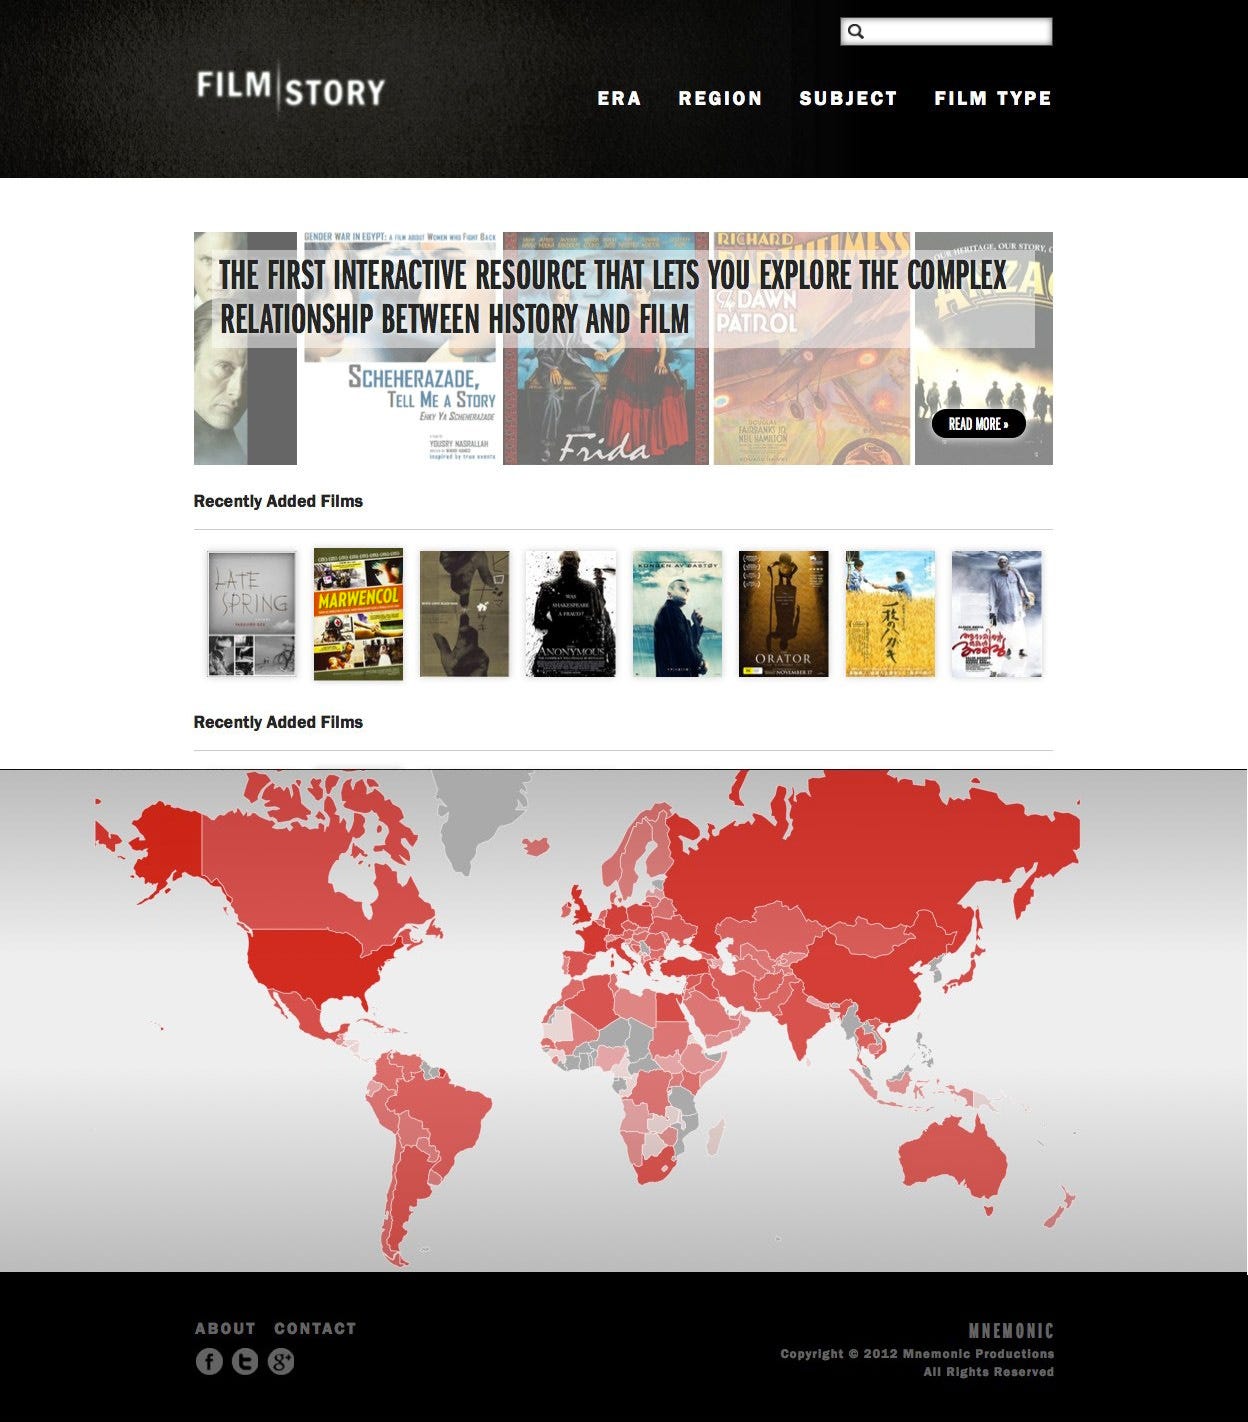 Screencapture of a now-defunct website, FilmStory. The navigation is a black bar with the wordmark and four navigation items for searching the website's content. The middle of the page shows two rows of film posters with the text: THE FIRST INTERACTIVE RESOURCE THAT LETS YOU EXPLORE THE COMPLEX RELATIONSHIP BETWEEN HISTORY AND FILM. The bottom of the page has an interactive world map with countries in shades of red.